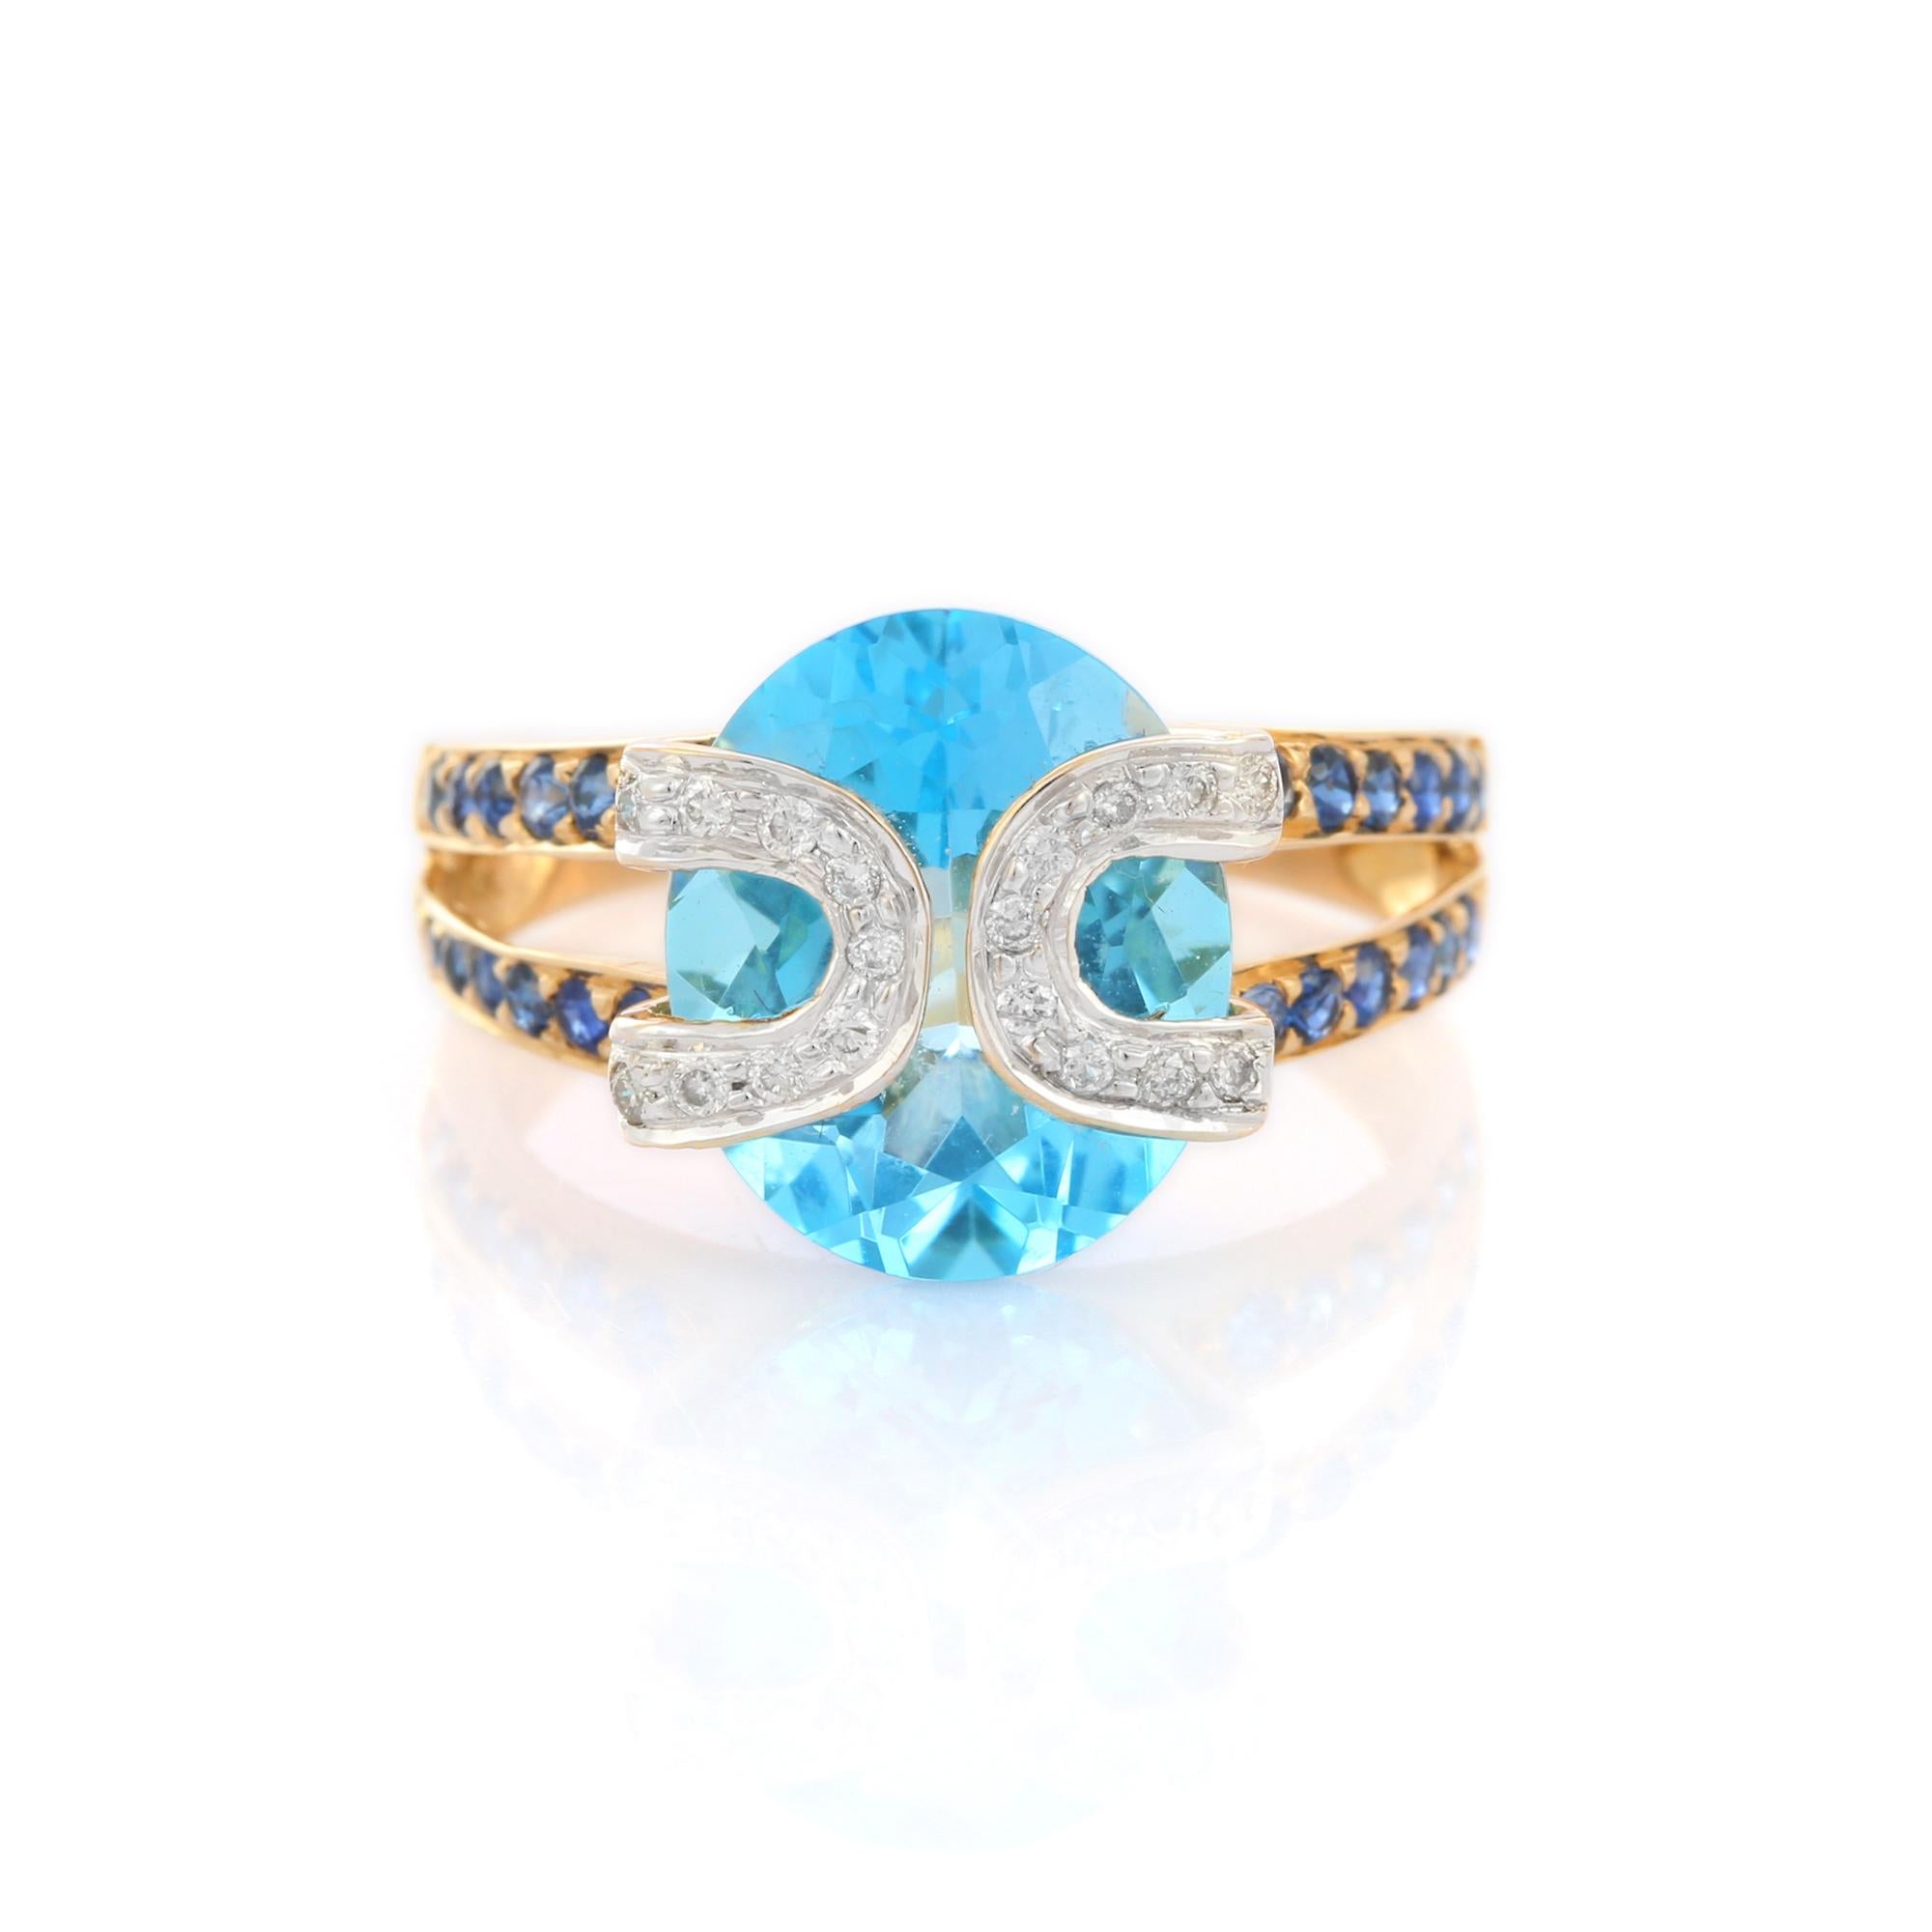 For Sale:  18K Yellow Gold Designer Blue Topaz Cocktail Ring with Sapphire and Diamonds 7